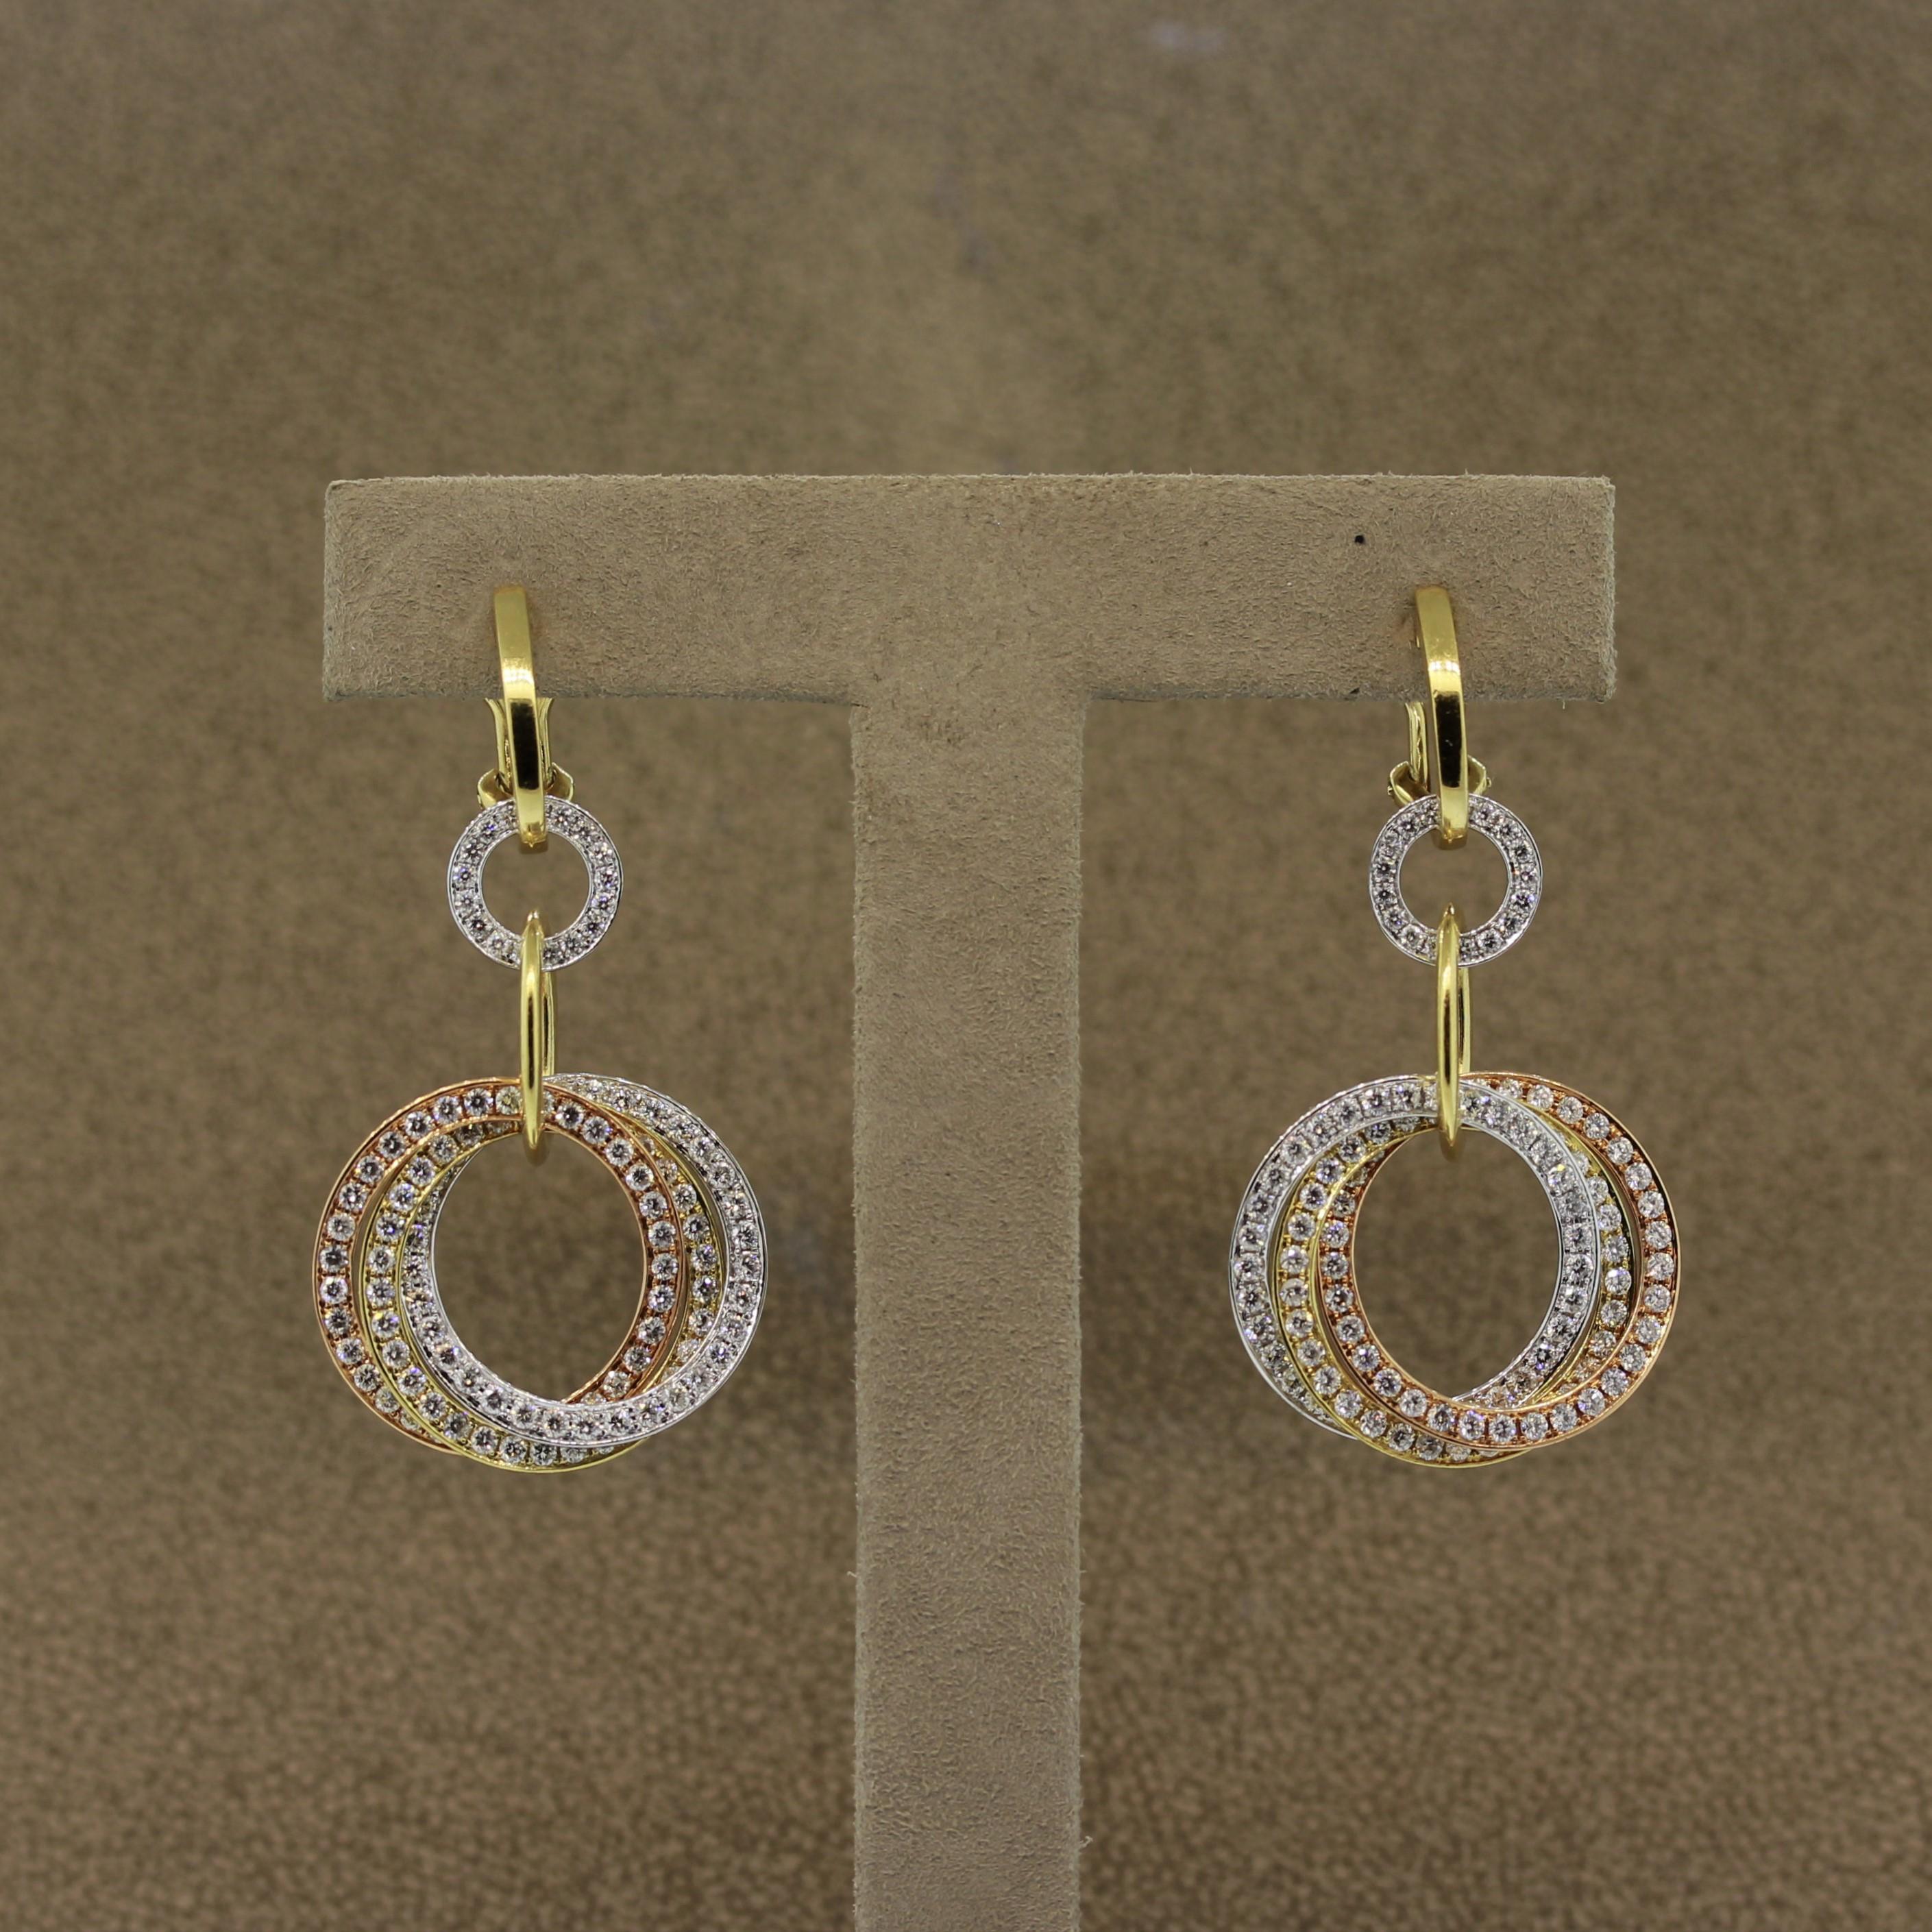 A special pair of earrings, in fact one of our favorites as well! They feature 3 independent hoops each made with a different color of 18k gold! Rose, Yellow and White. They overlap with each other and move freely from one another. They are set with